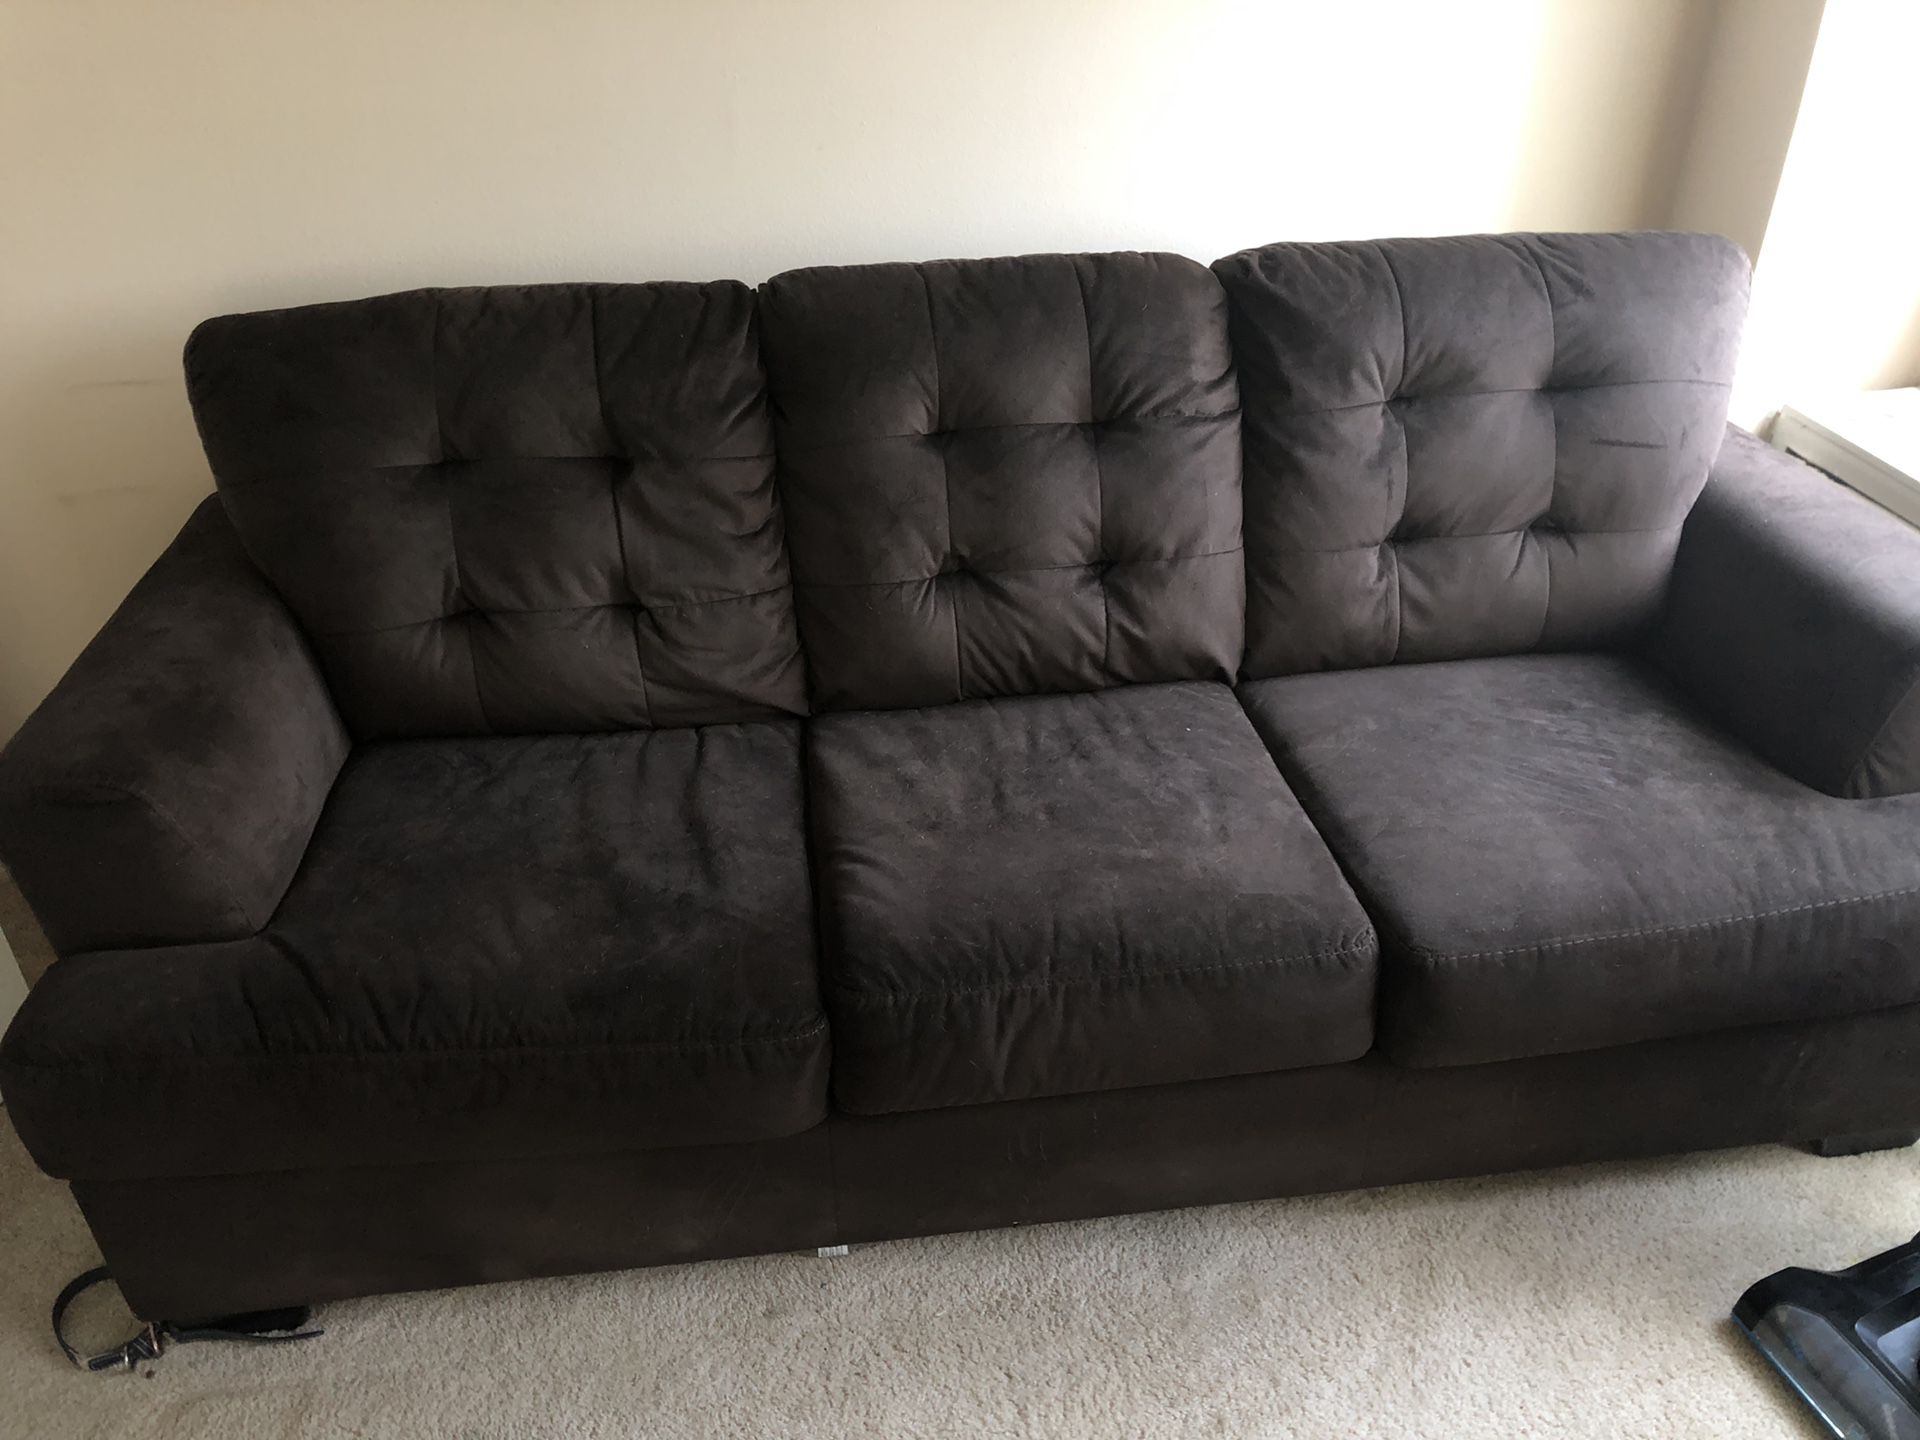 Brown 3 seat couch with new bed inside